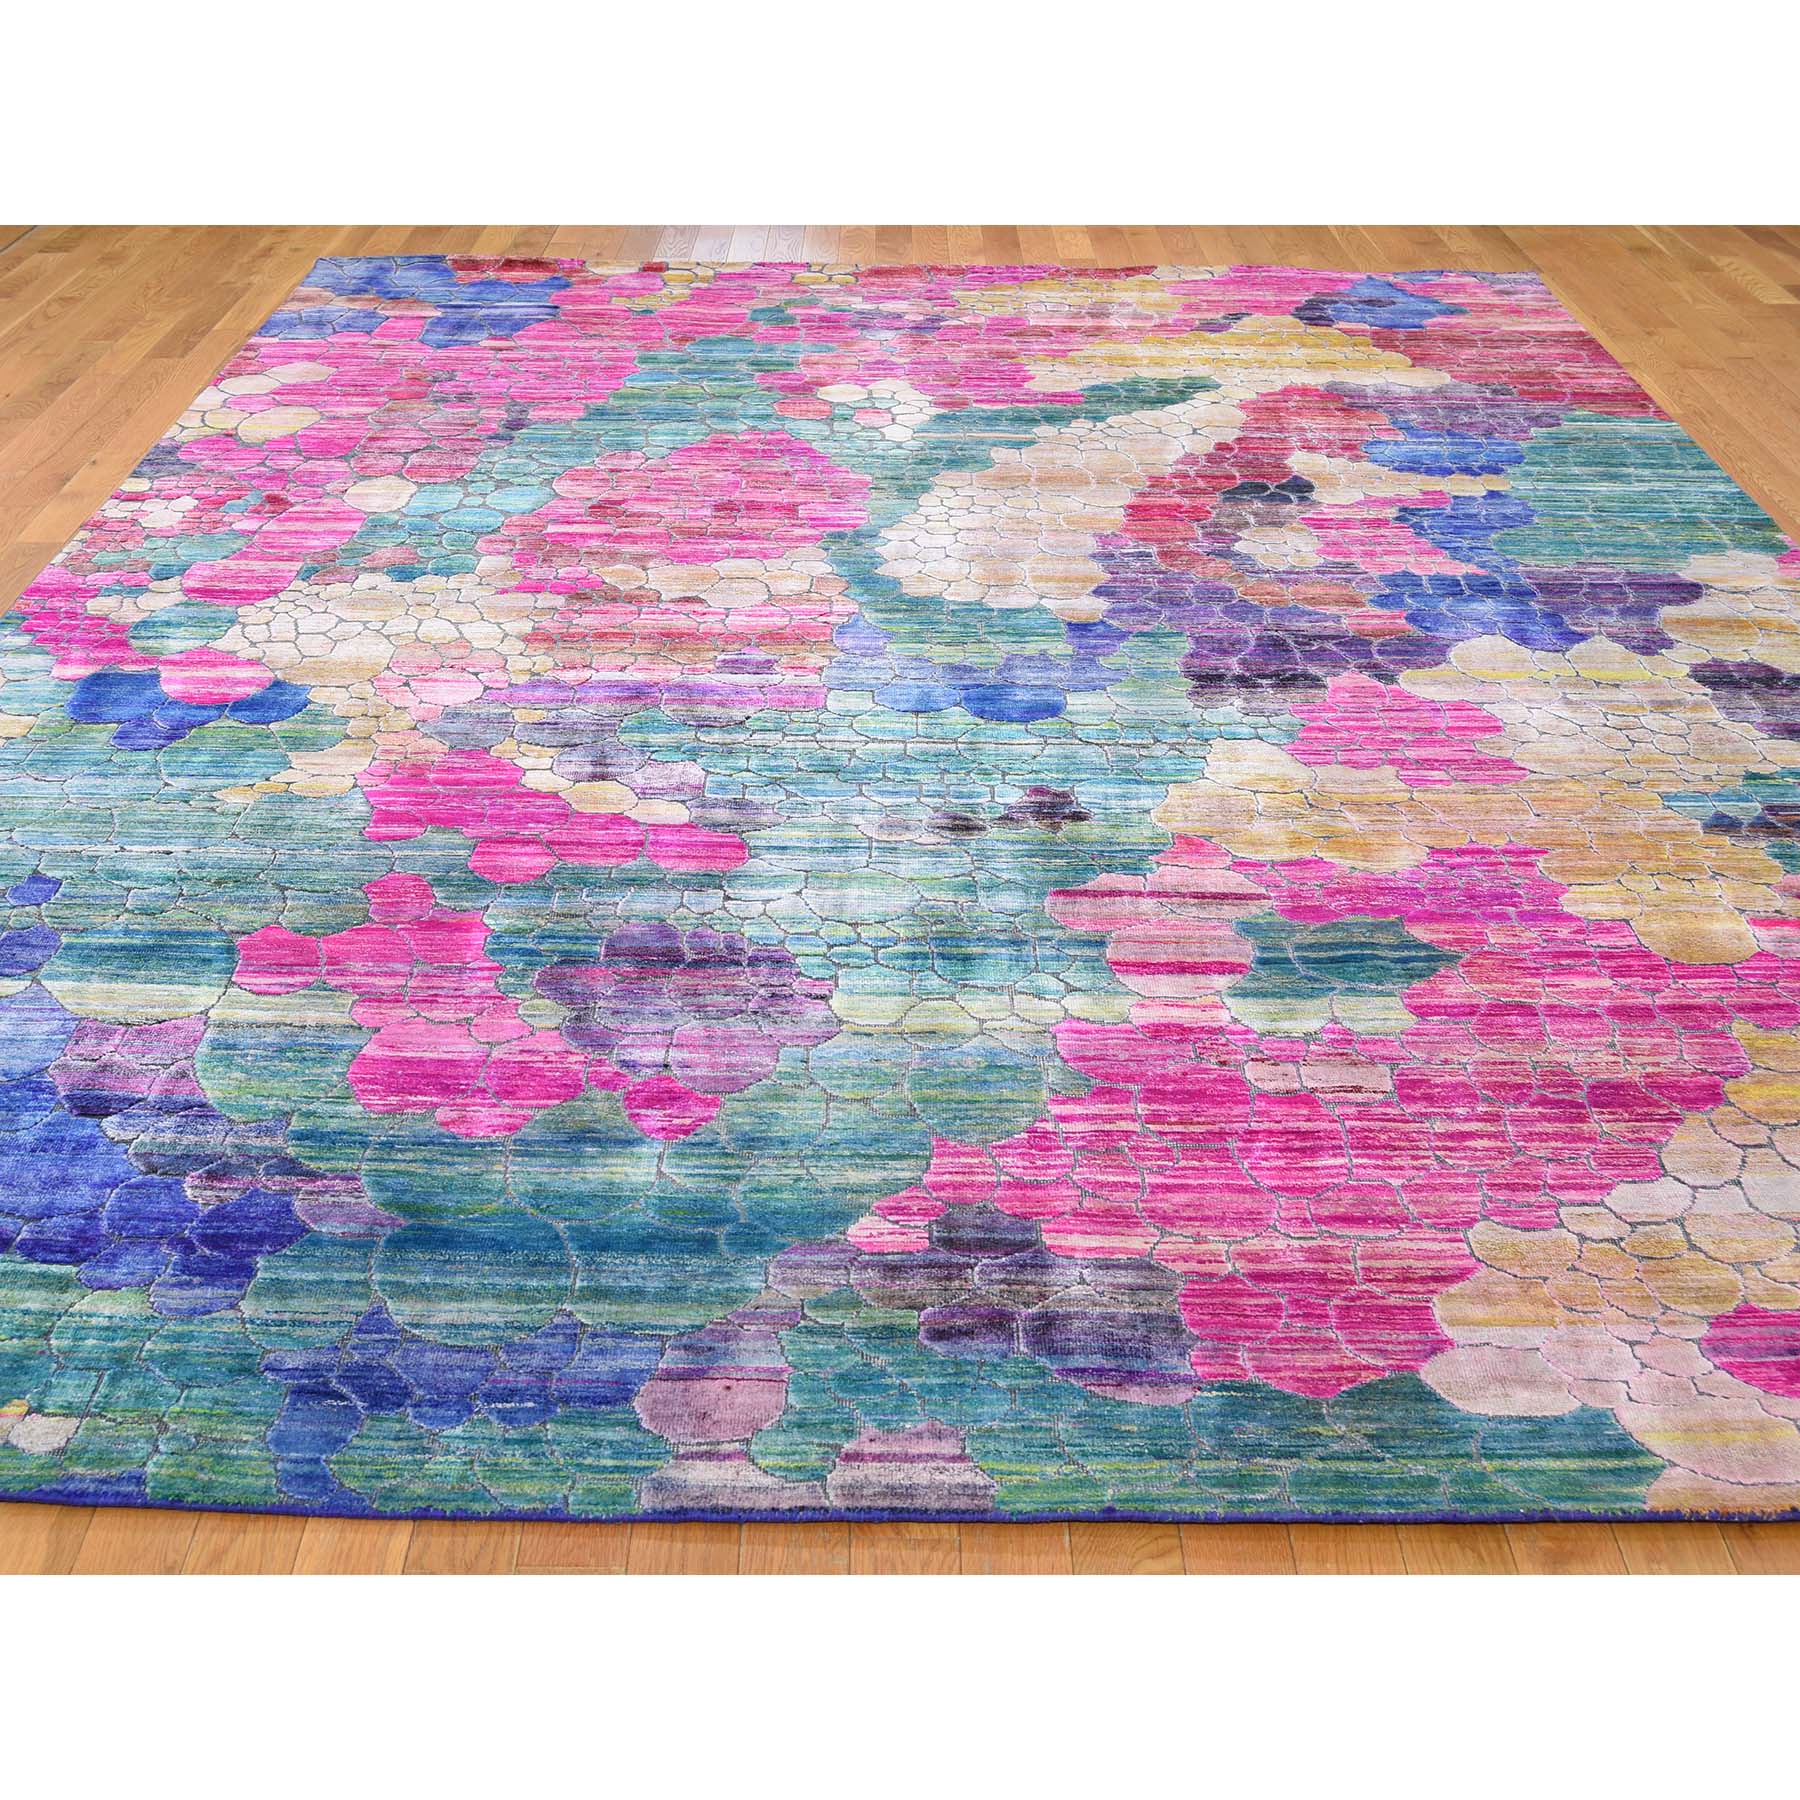 8-10 x12-2  THE COLORFUL GRAPES, Sari Silk Hand-Knotted Oriental Rug 